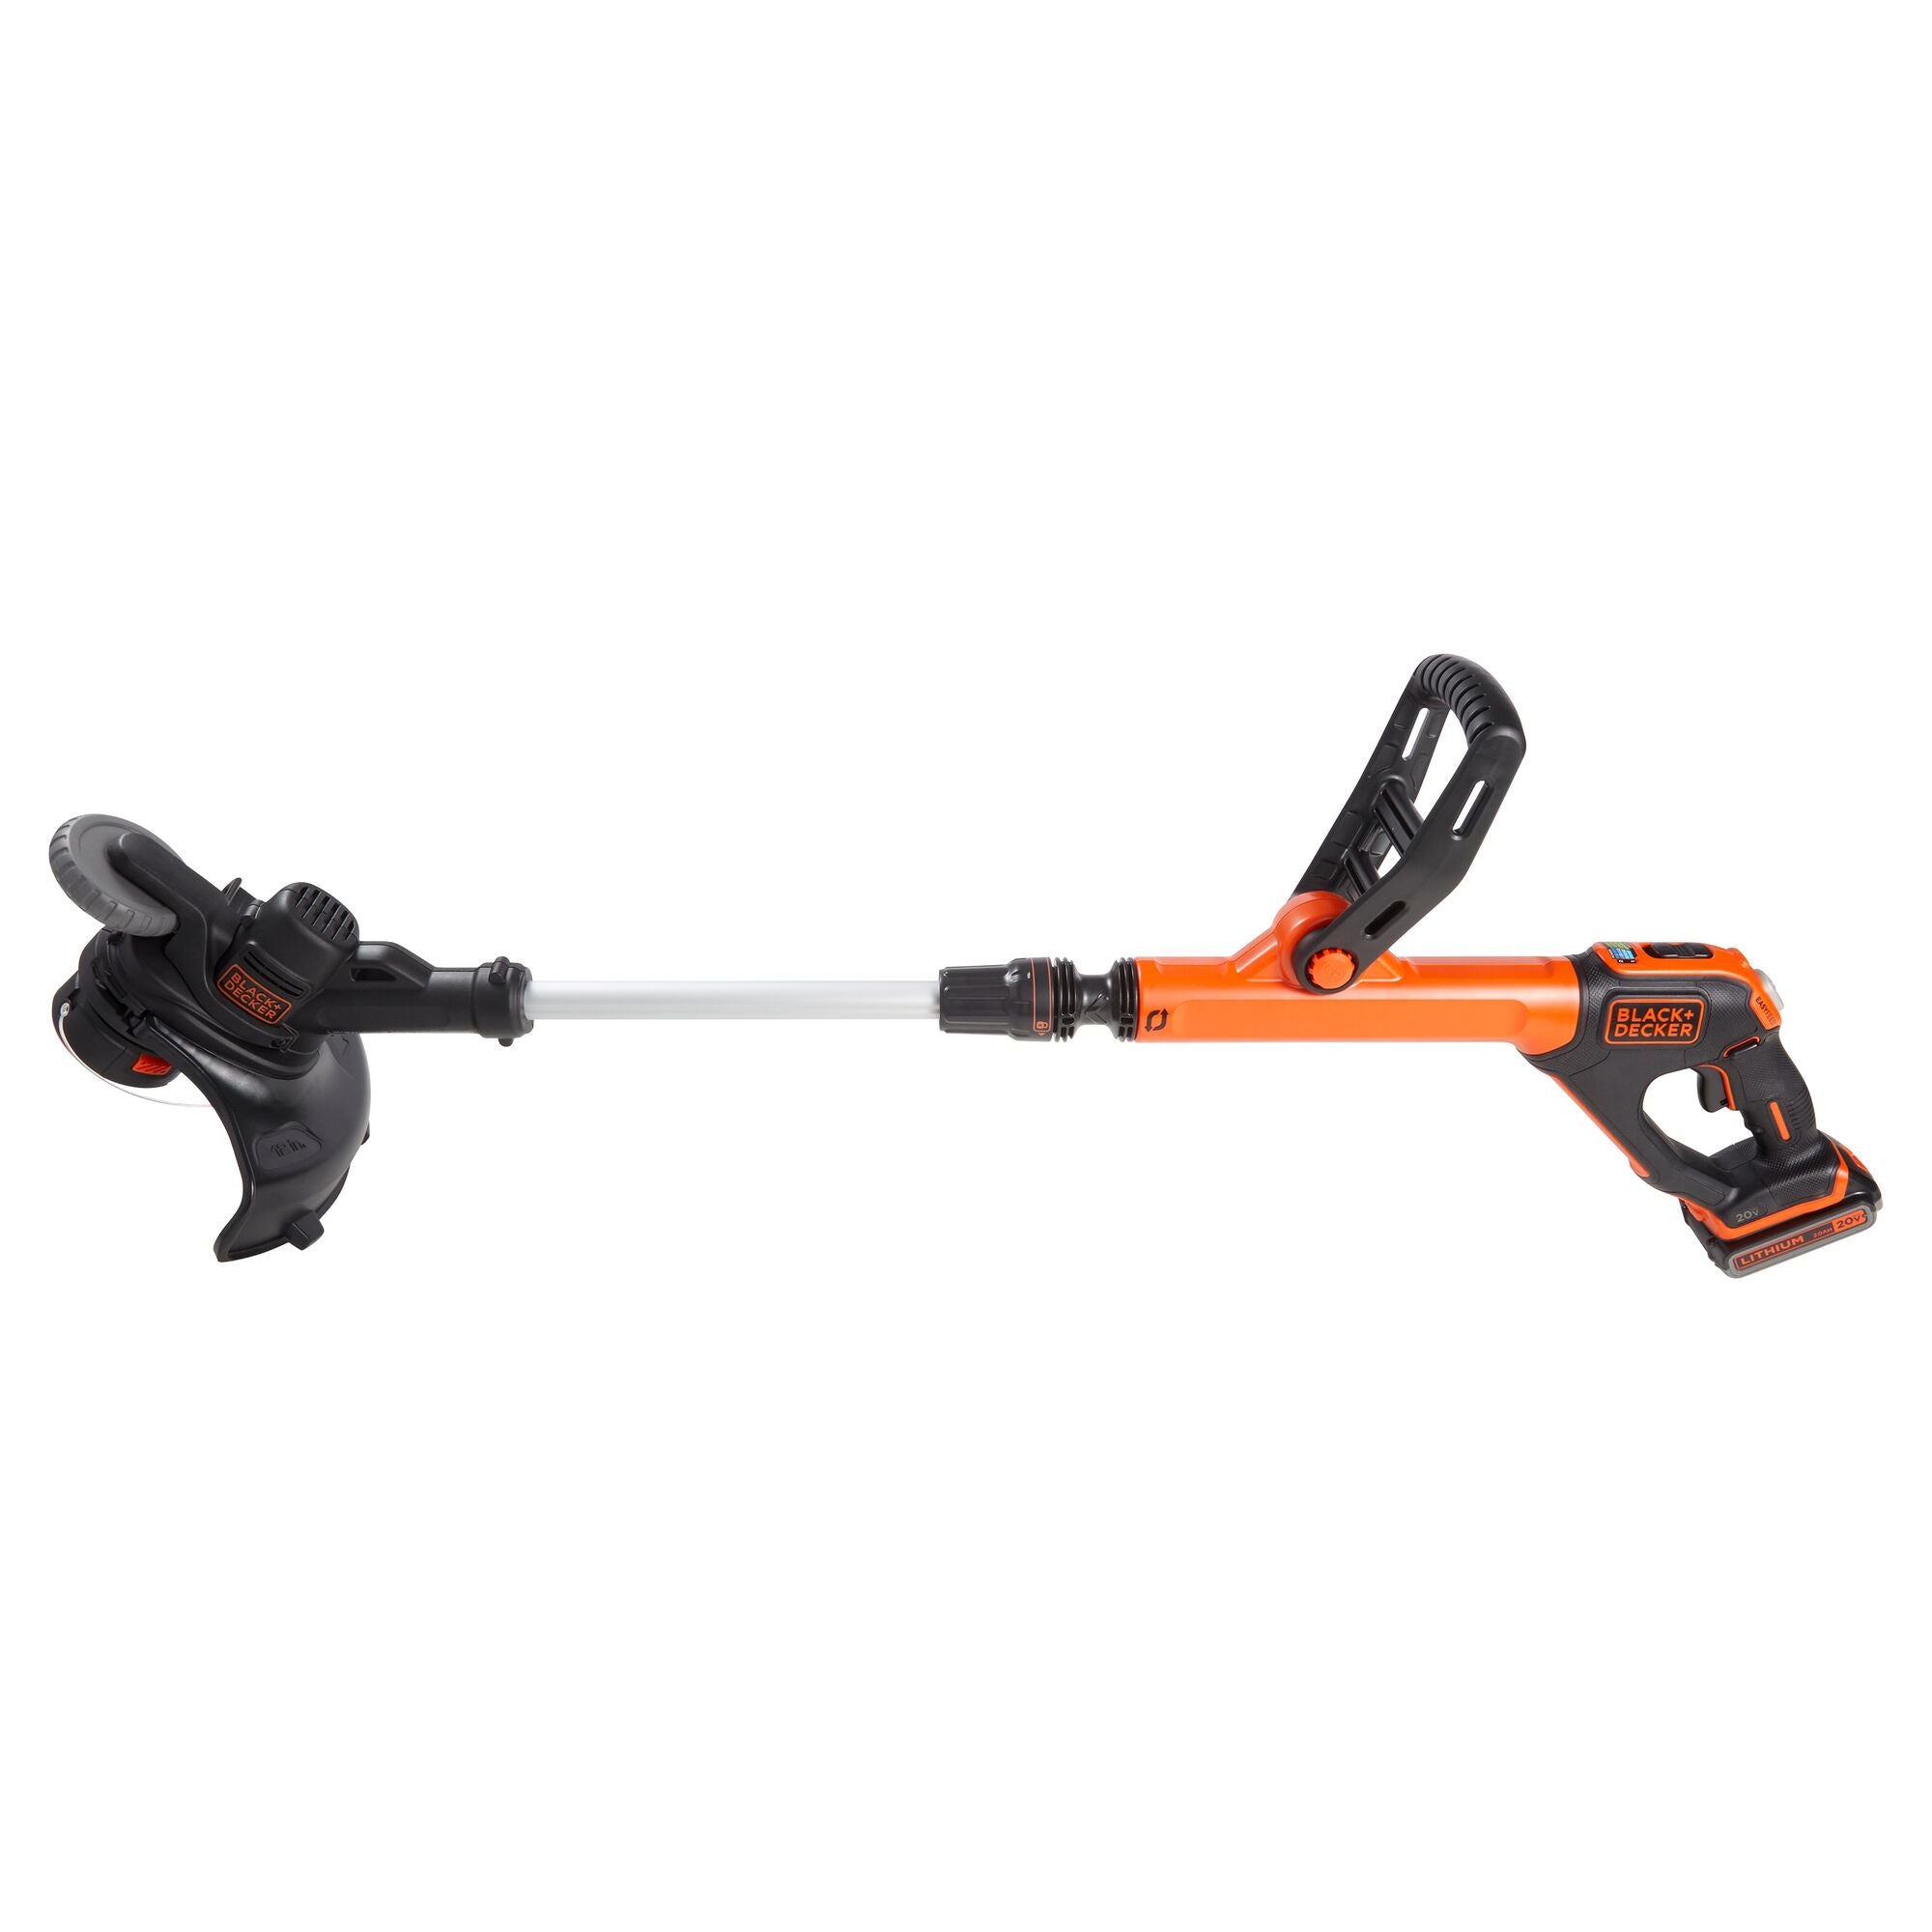 A close look at the handle grip and switch of a BLACK+DECKER 20V MAX* String Trimmer.